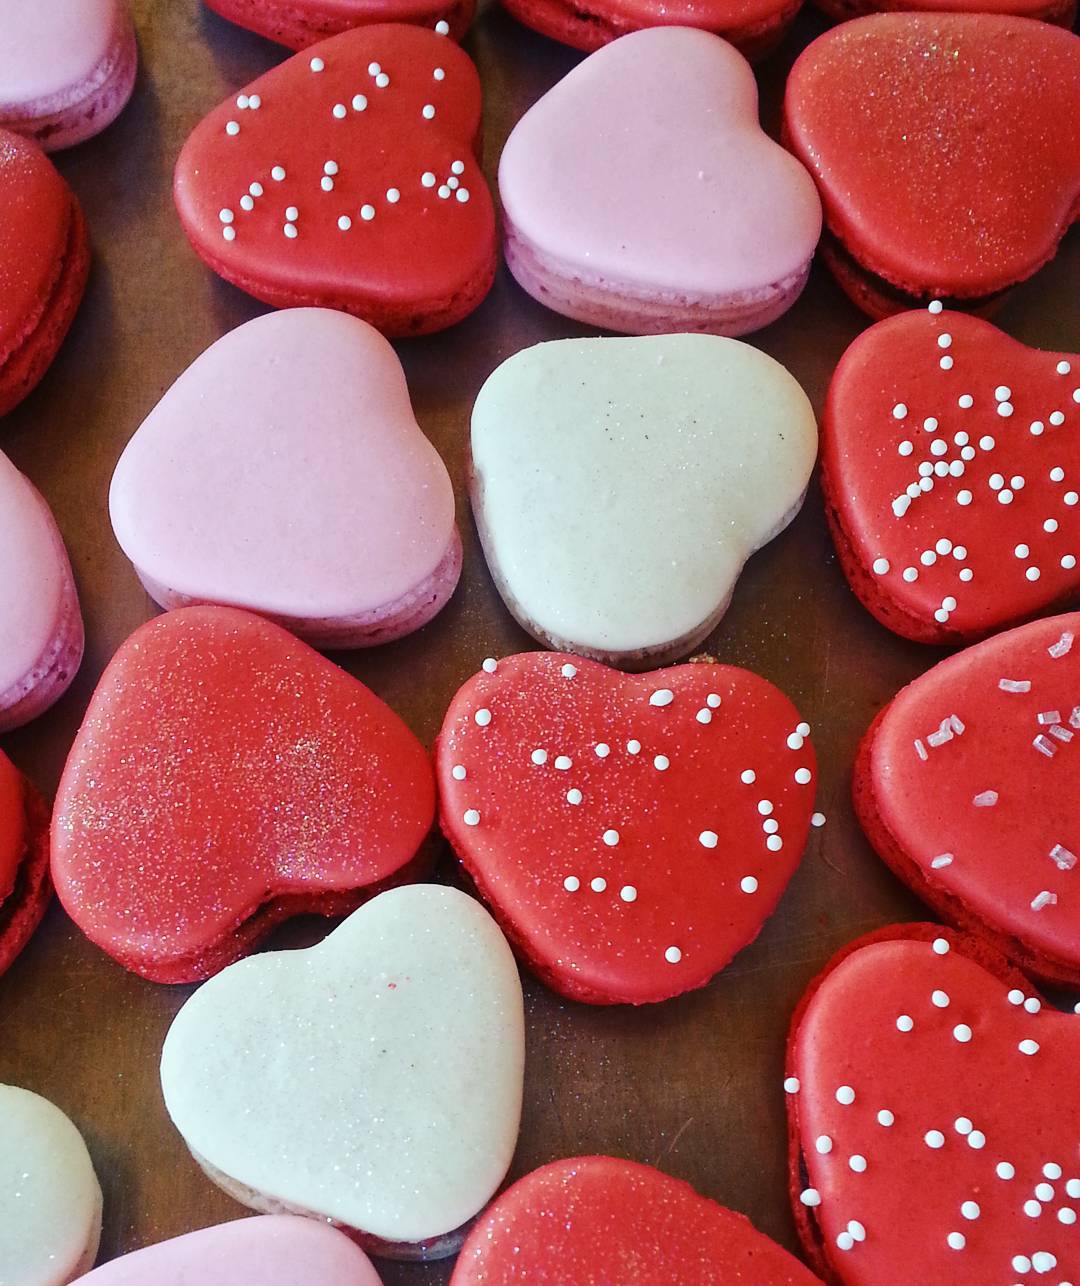 Hearts come in all shapes, sizes and colors 😊
Pre-order at 405 430 5384 or www.belle-kitchen.com/shop (shipping available) ❤️
@bellekitchenokc #hearts #love #macaron #macarons #food #foodie #foodporn #foodpics #valentines #chocolate #vanilla #saltedcaramel #raspberry #cherrycheesecake #strawberry #beautiful #bellekitchen